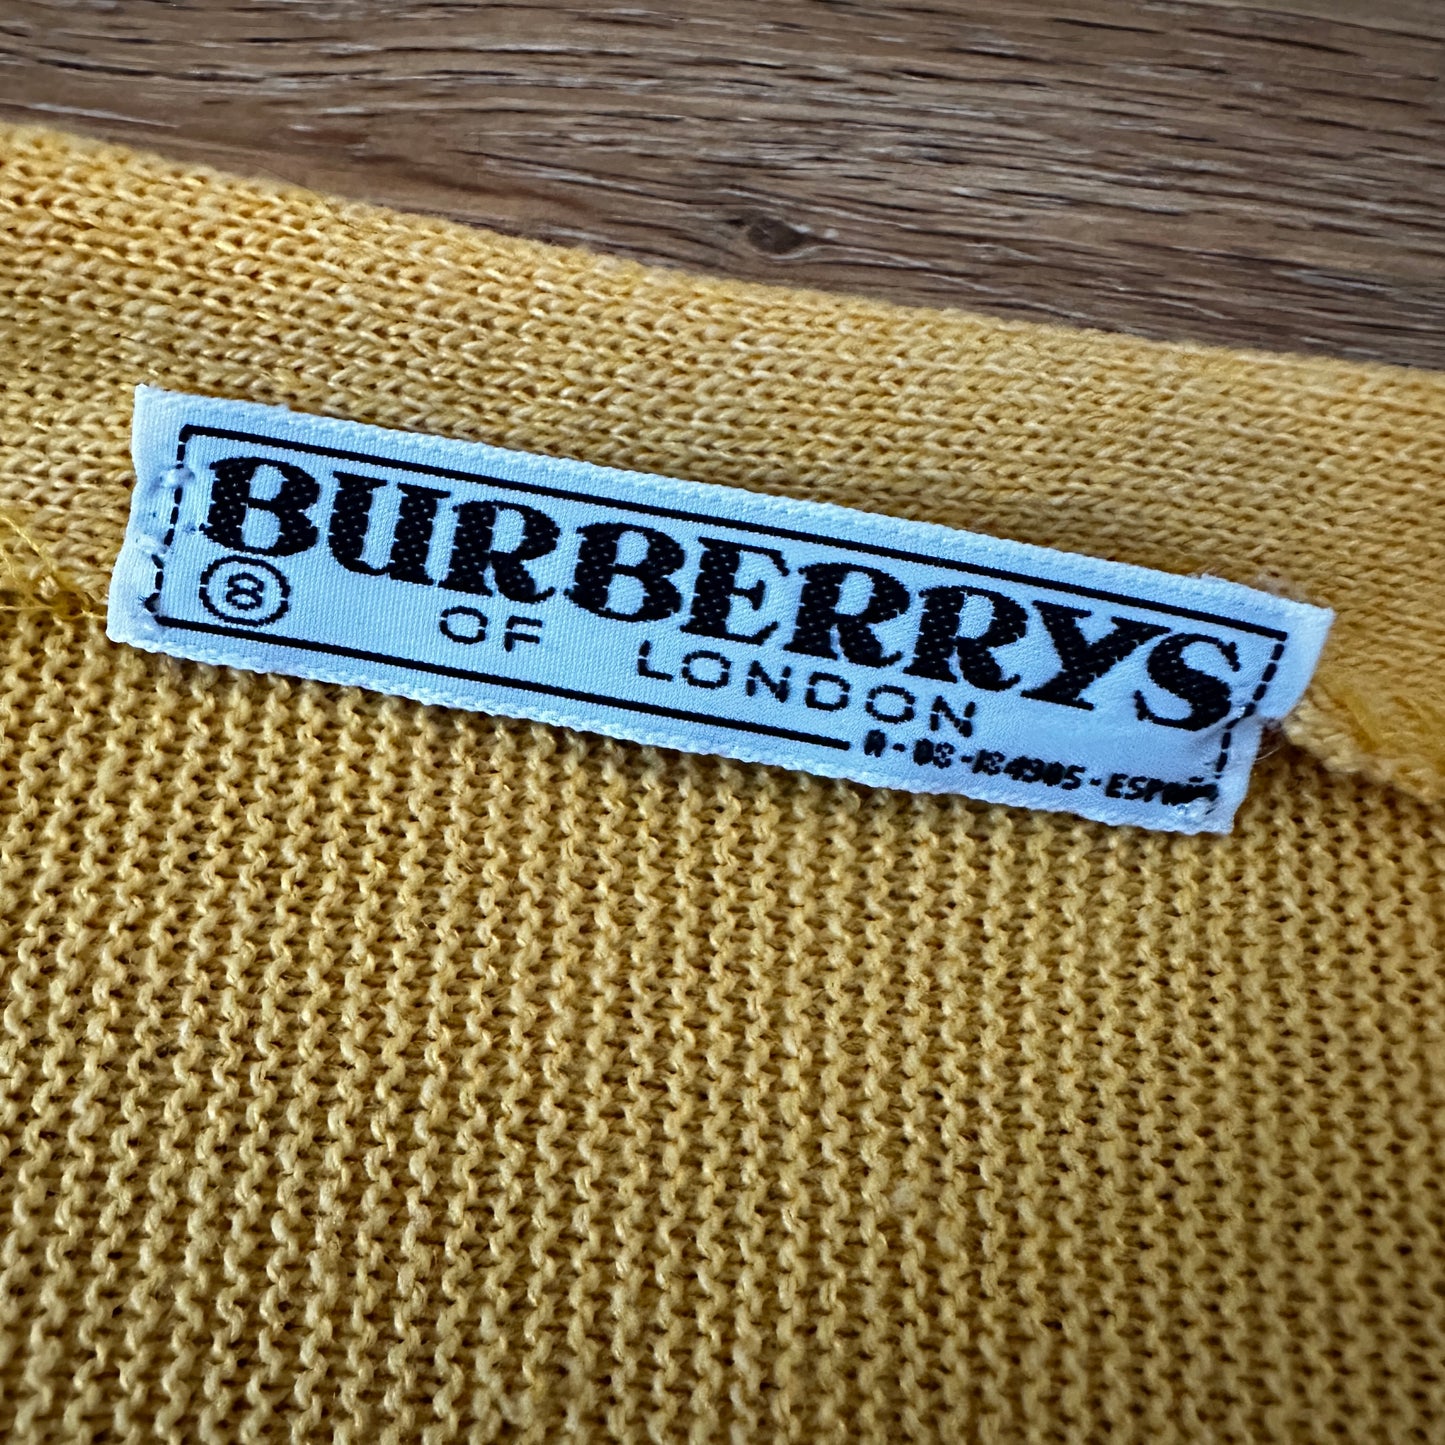 Burberrys Vintage 80s Cardigan Yellow - Deadstock - 7 / XL - Made in Spain